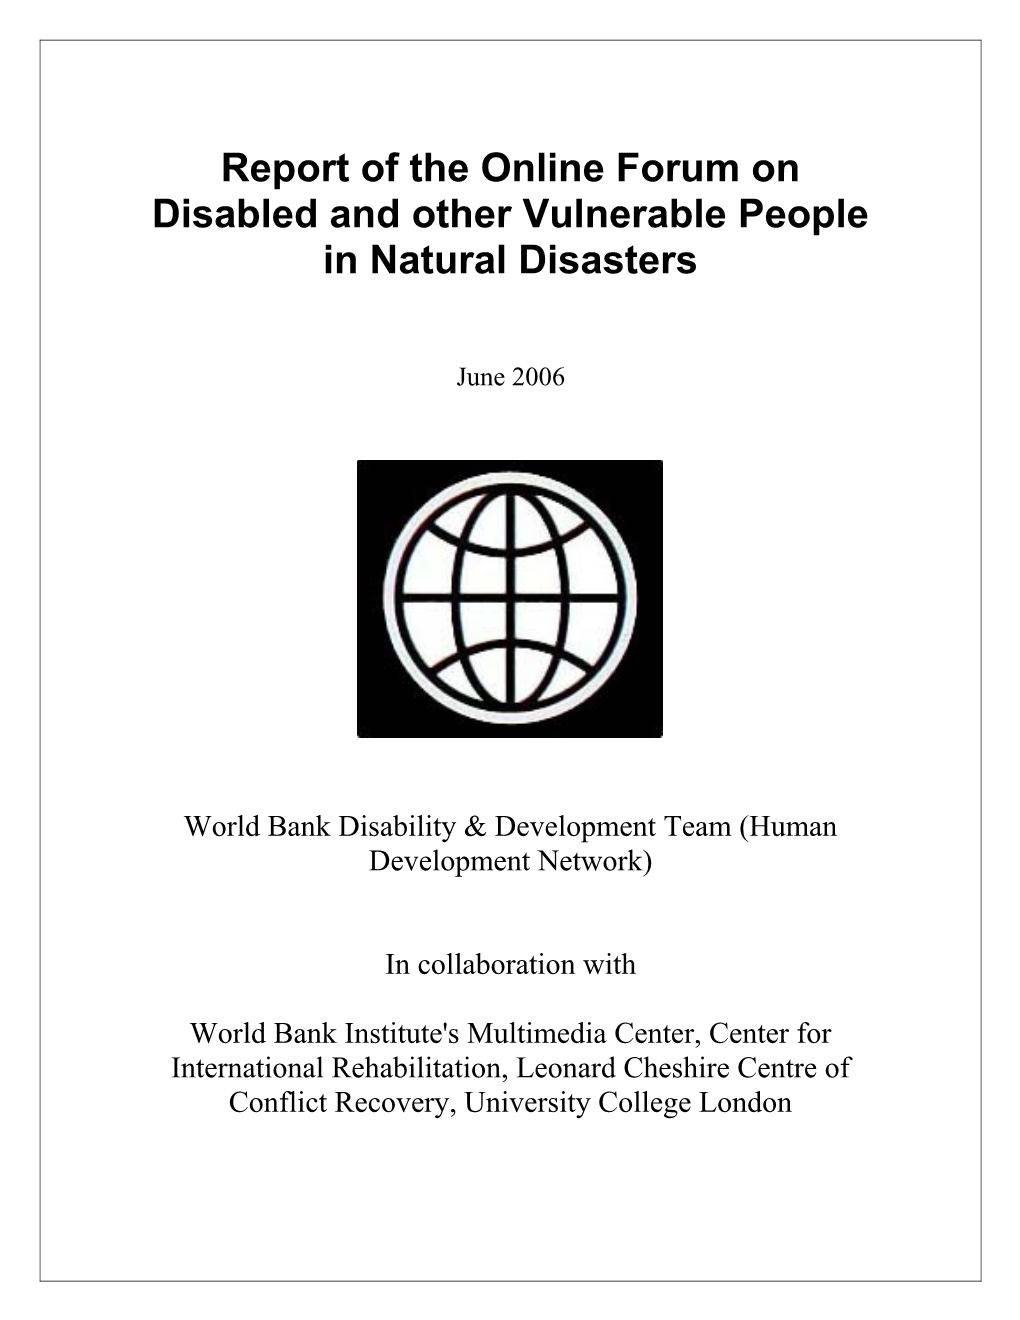 Disabled and Other Vulnerable People in Natural Disasters- Summary of Discussion